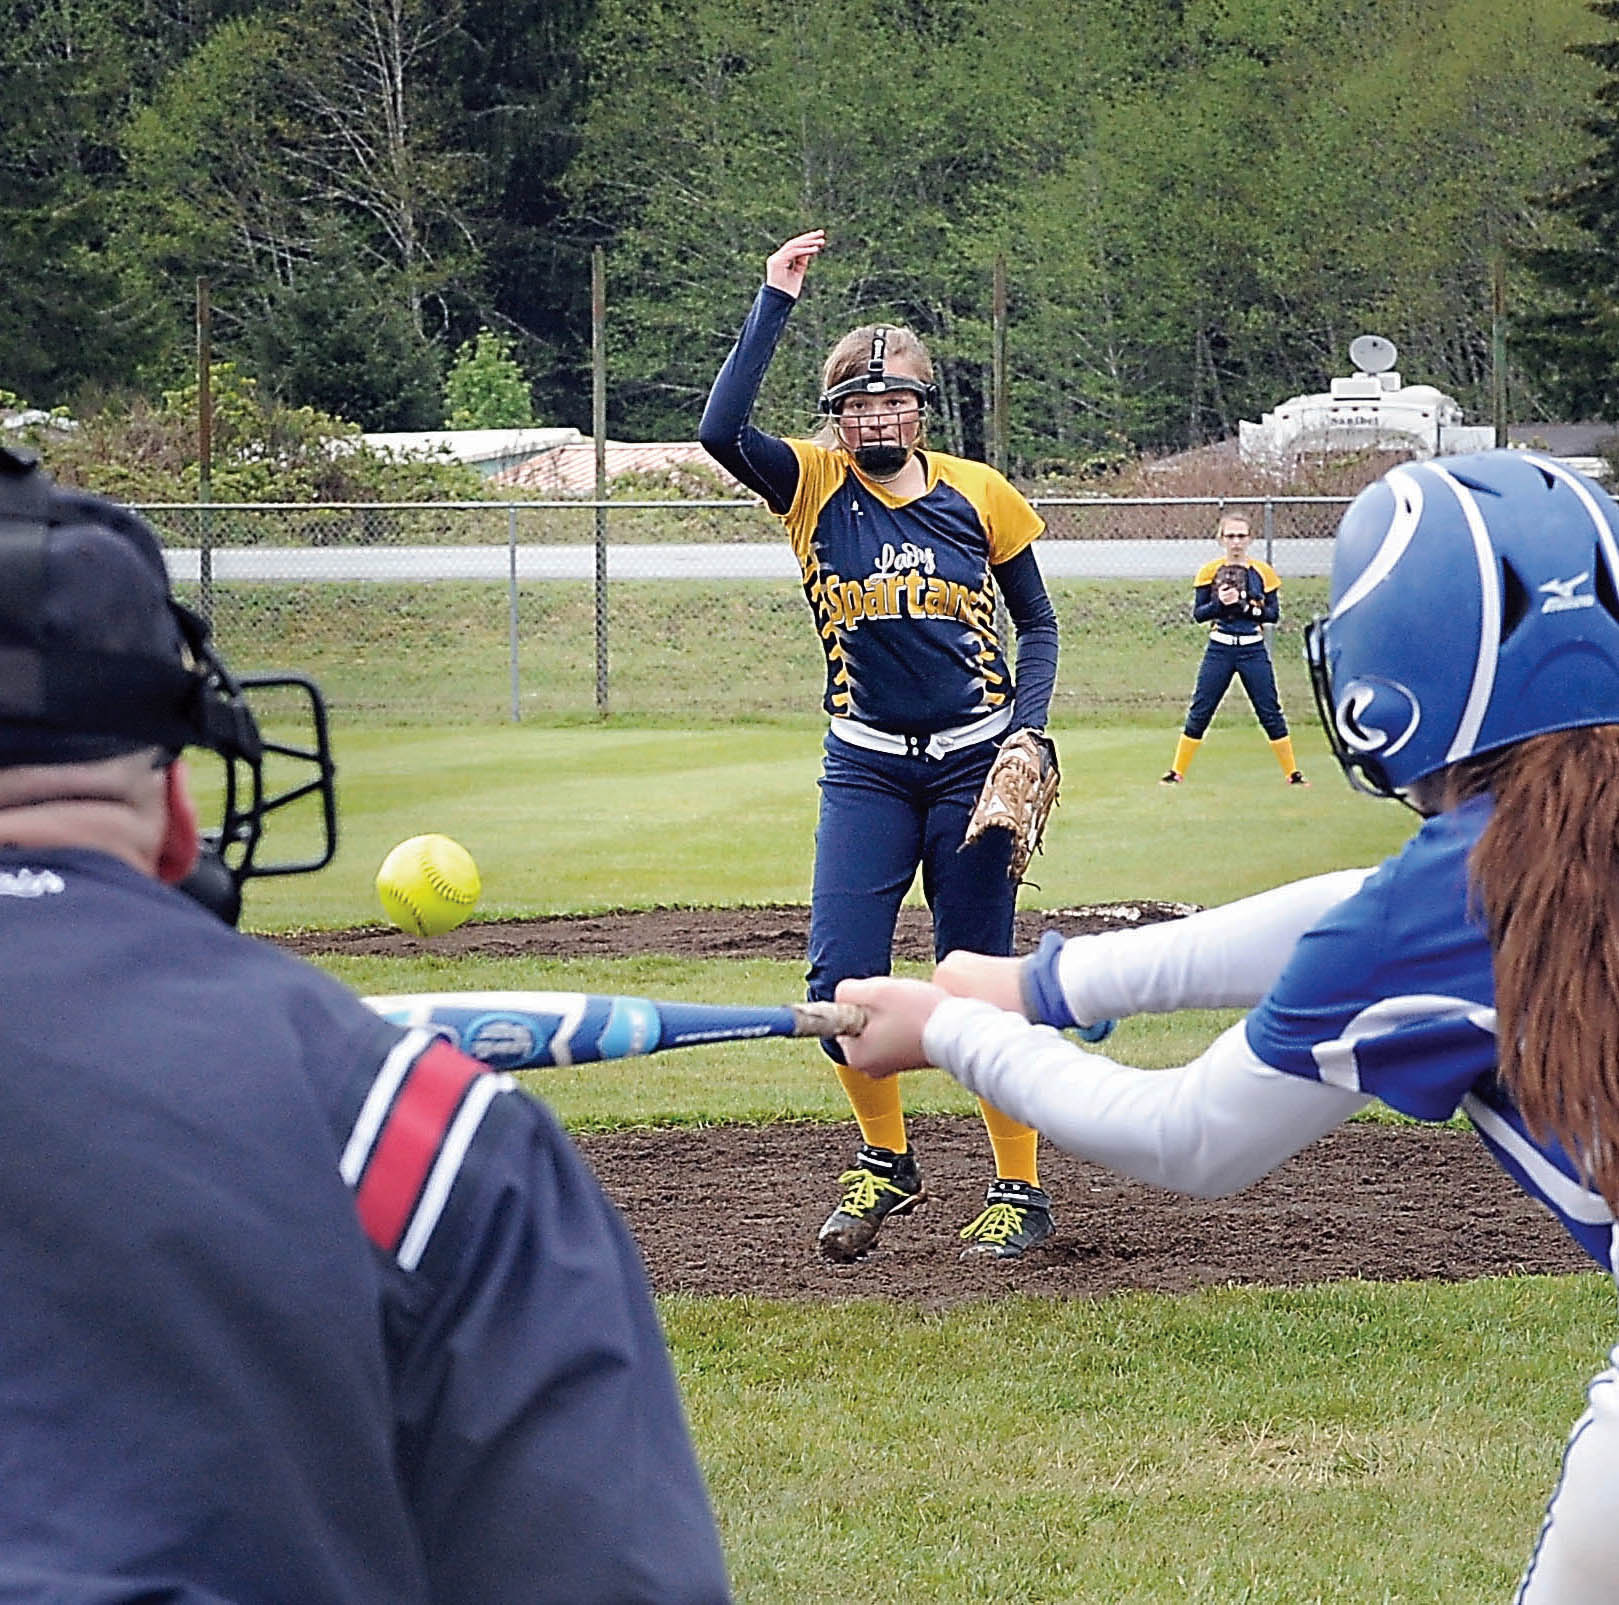 Rochester's Madison Justus takes a swing at a pitch thrown by Forks' Sarah Adams. Lonnie Archibald/for Peninsula Daily News